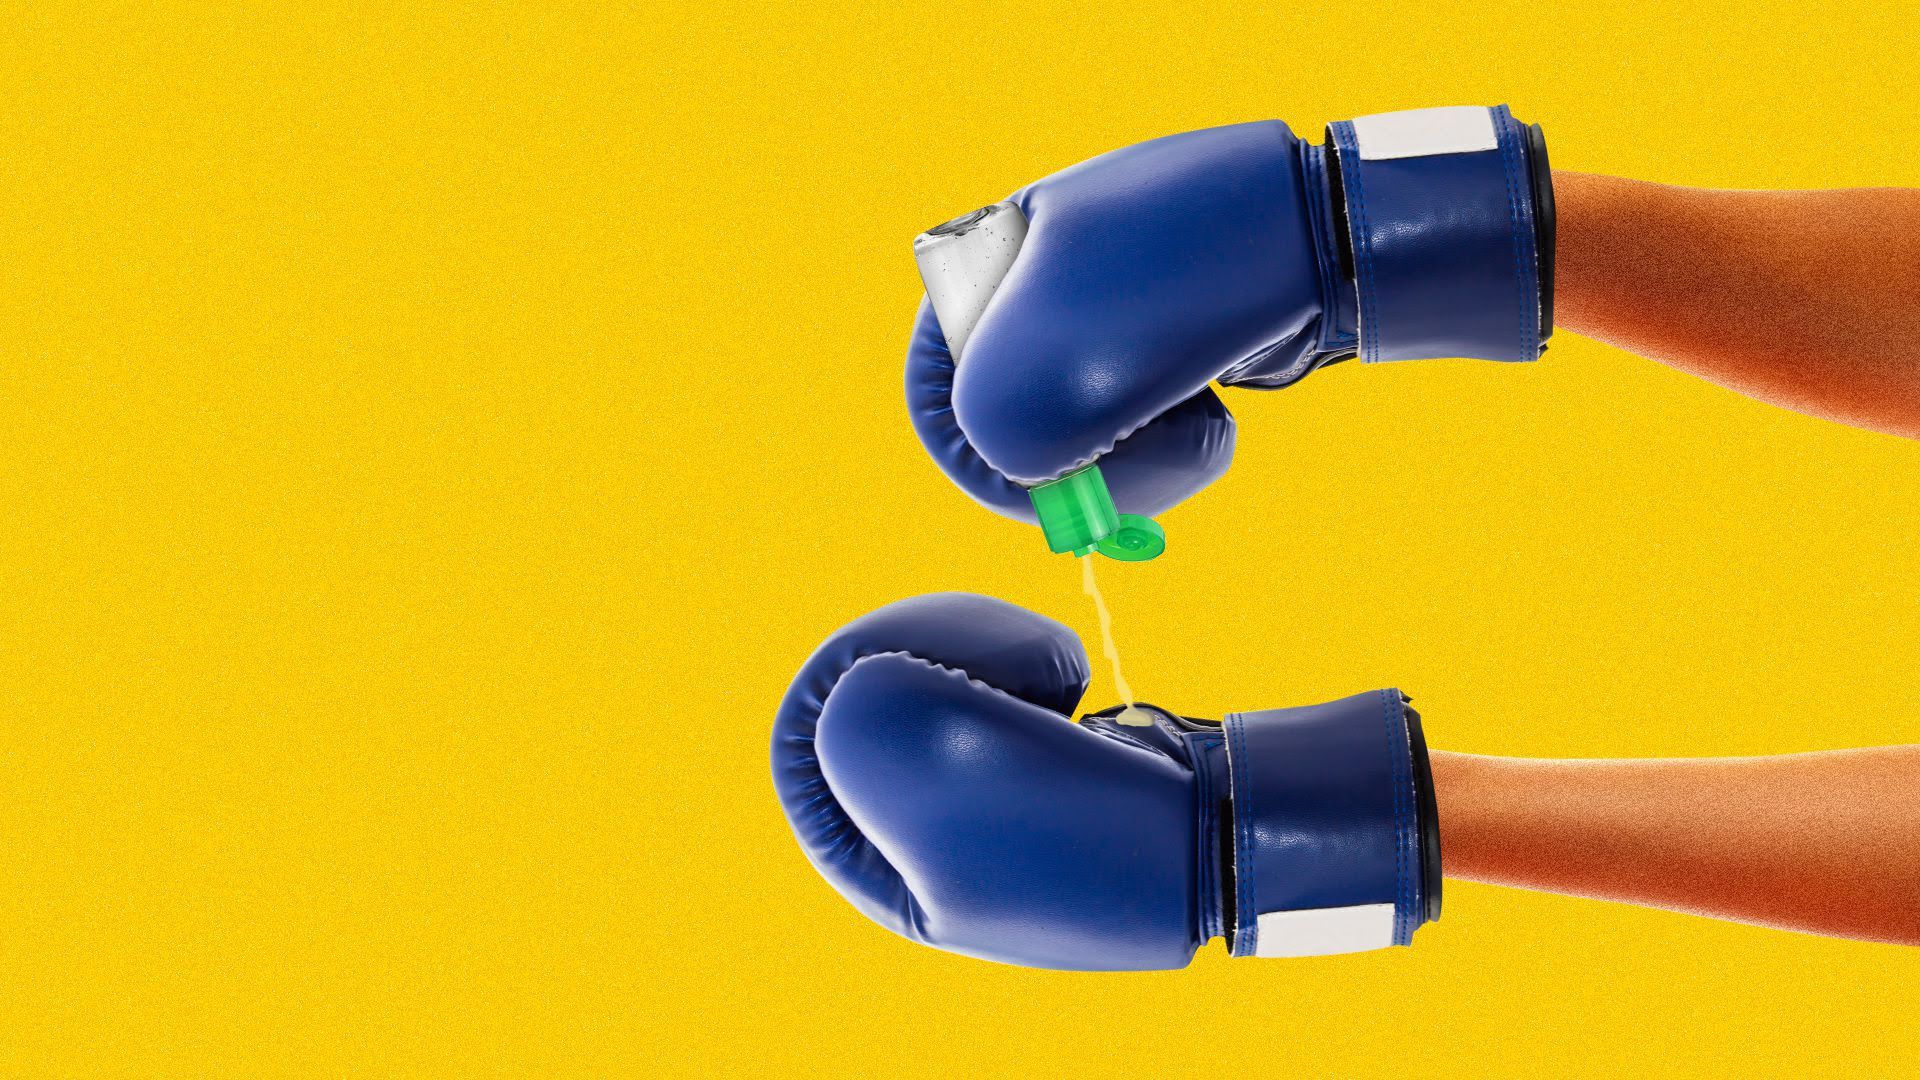 Illustration of someone applying hand sanitizer while wearing boxing gloves